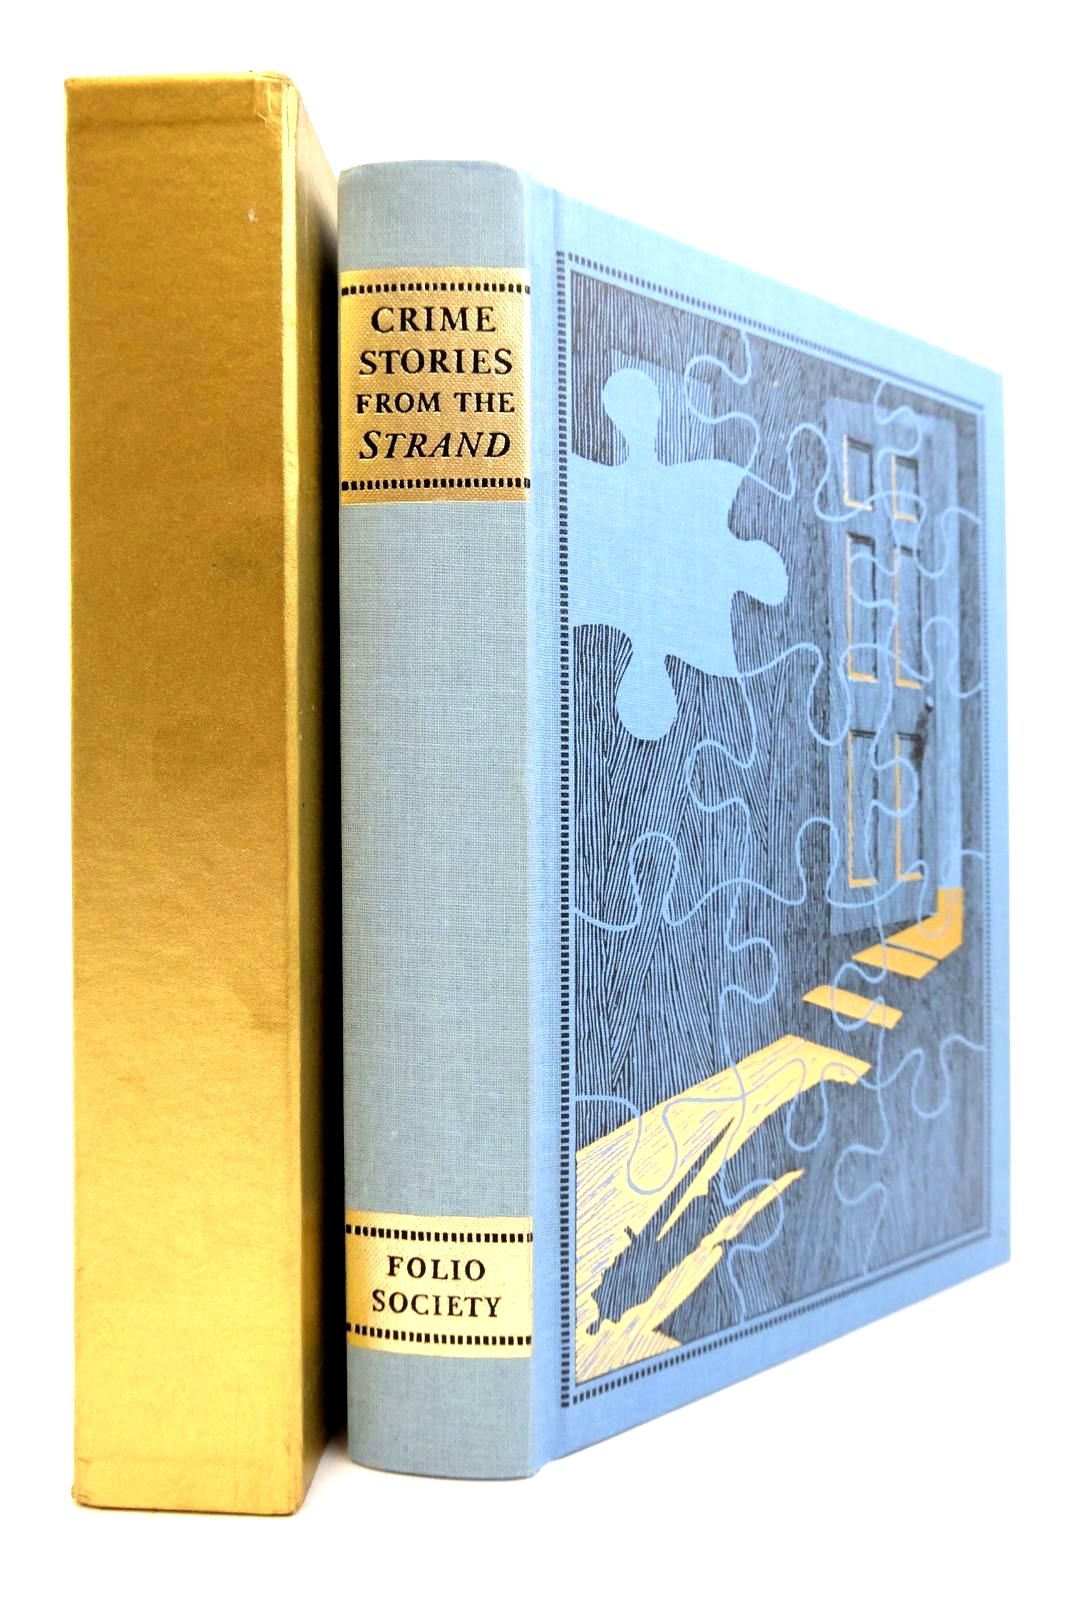 Photo of CRIME STORIES FROM THE 'STRAND' written by Beare, Geraldine Keating, H.R.F. illustrated by Eccles, David published by Folio Society (STOCK CODE: 2139228)  for sale by Stella & Rose's Books